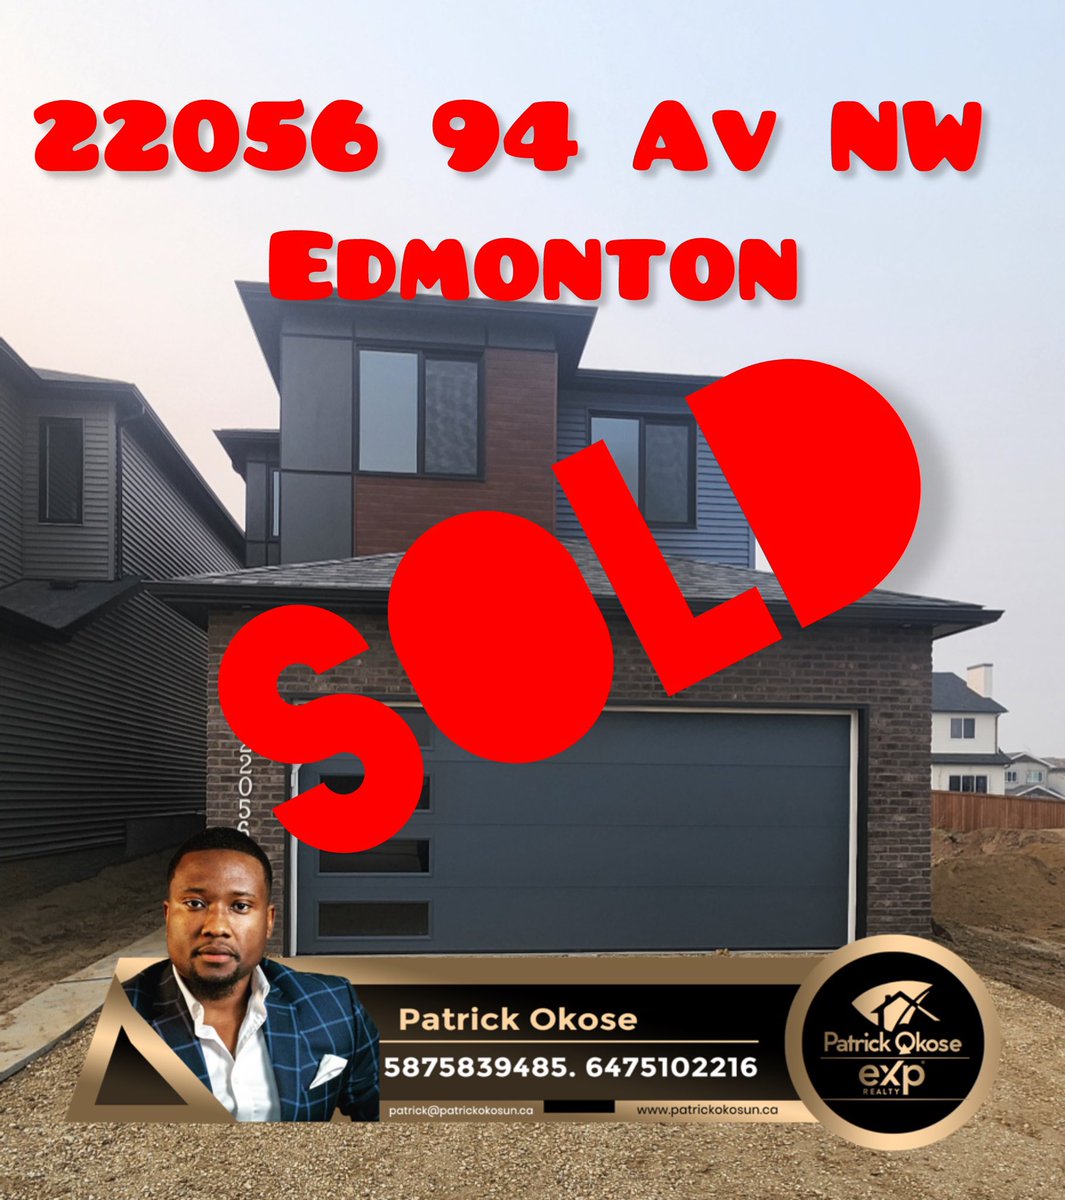 SOLD!!! Welcome to The Chaucer in Secord, this 3 bed, 2.5 bath attached garage home that is perfect for lovers of functional luxury! #therealpatrickokose #therealpatrickokoseandassociates #edmonton #yeg #edmontonliving #yeglocal #yegfood